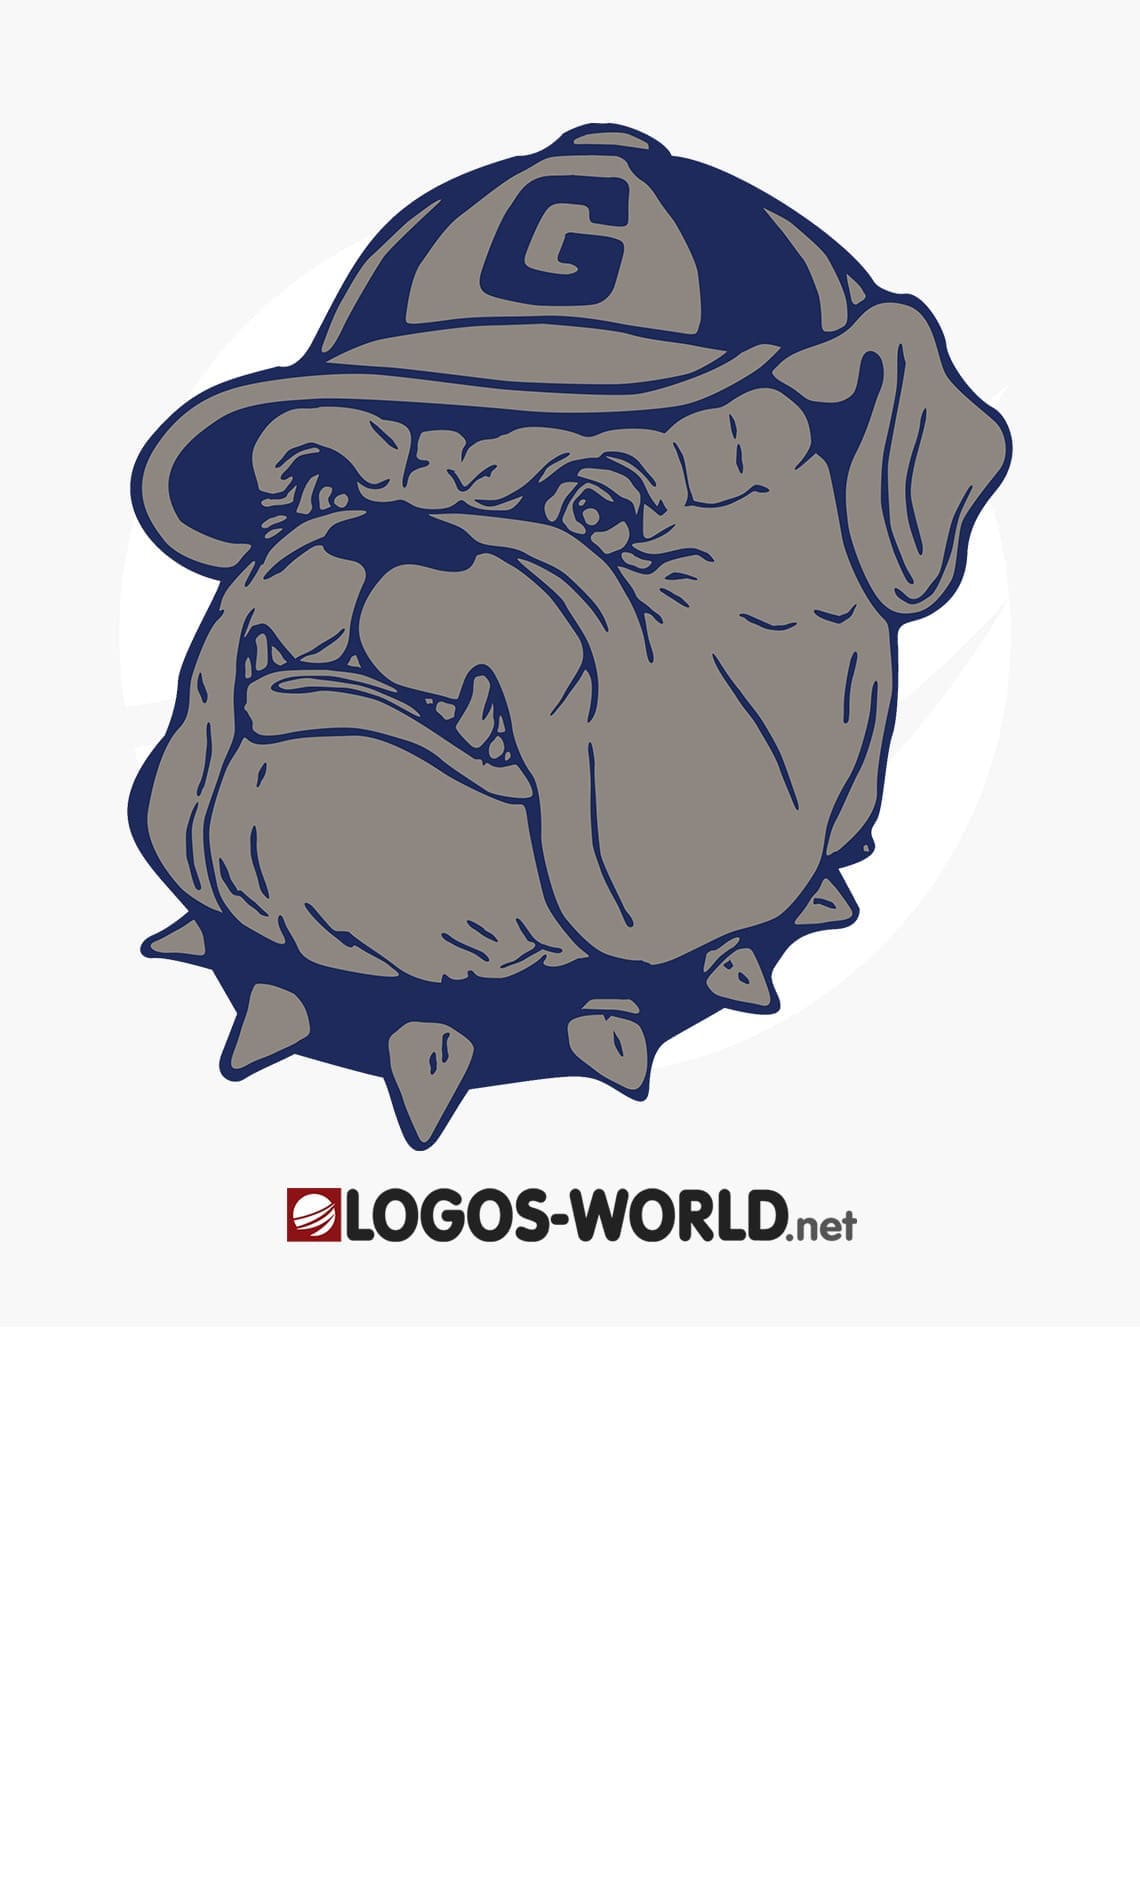 Georgetown Hoyas Logo The Most Famous Brands And Company Logos In The World